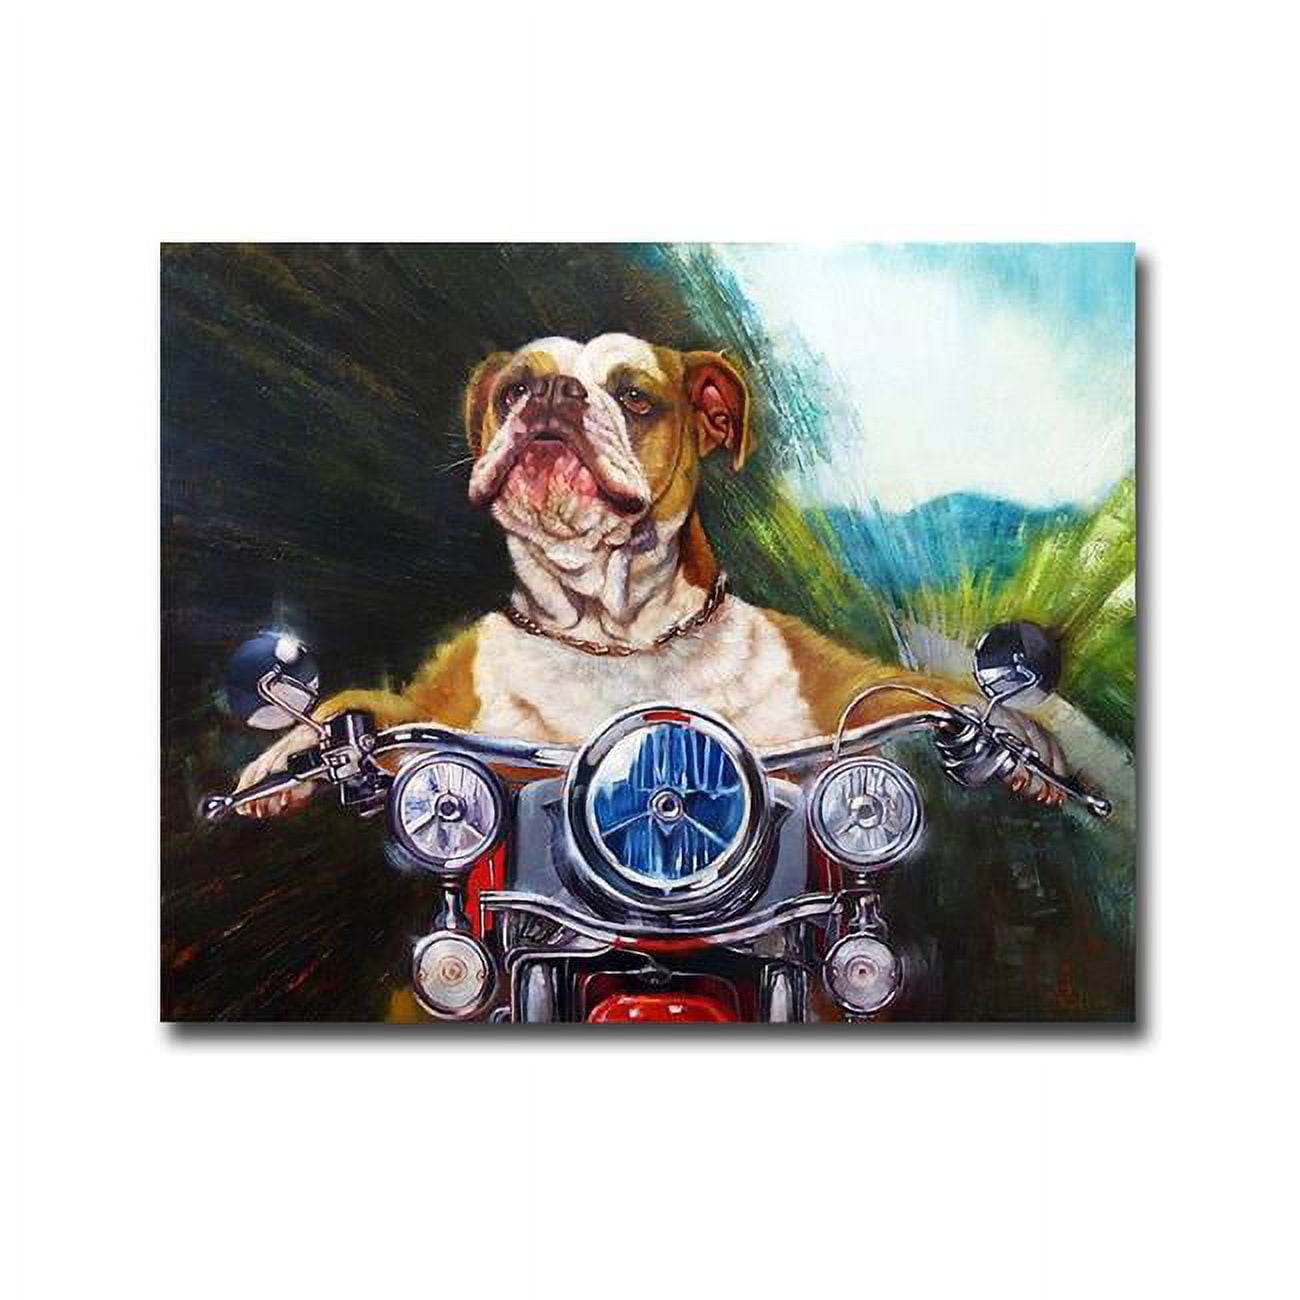 1215634ig Born To Be Wild By Lucia Heffernan Premium Gallery-wrapped Canvas Giclee Art - 12 X 15 In.